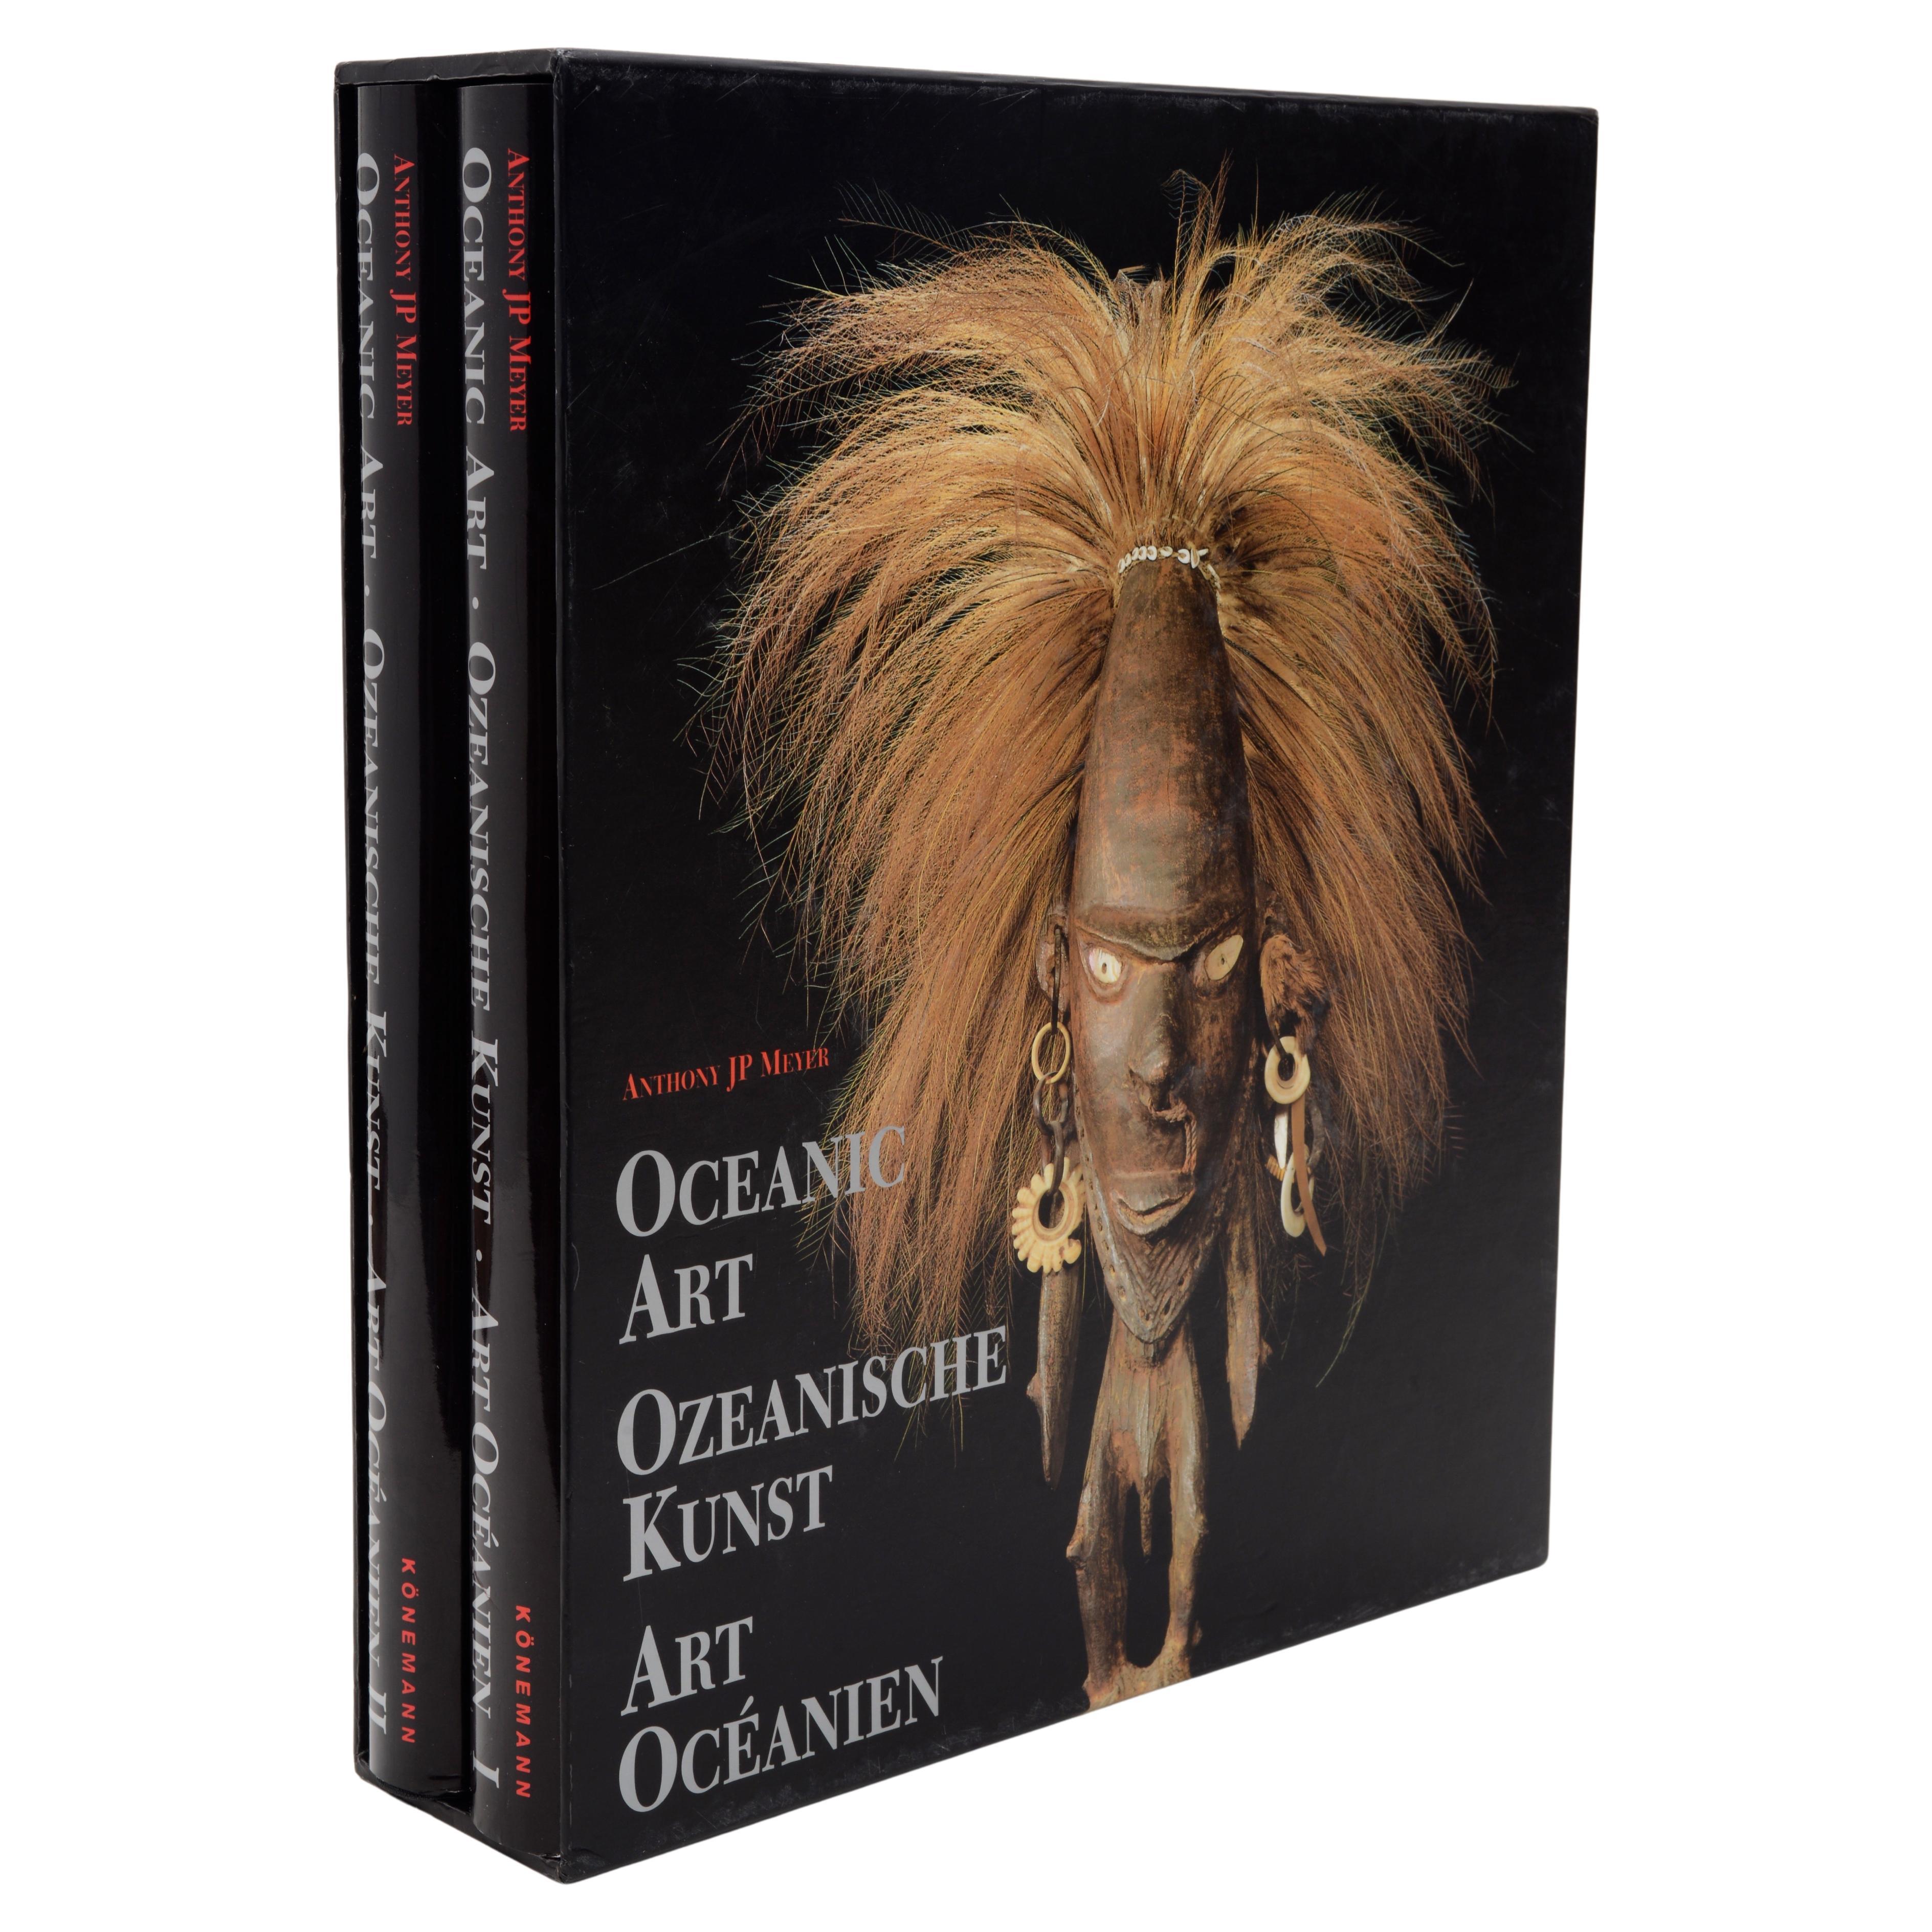 Oceanic Art, 2 Vol Set by Anthony J.P. Meyer, 1st Ed in English, French & German